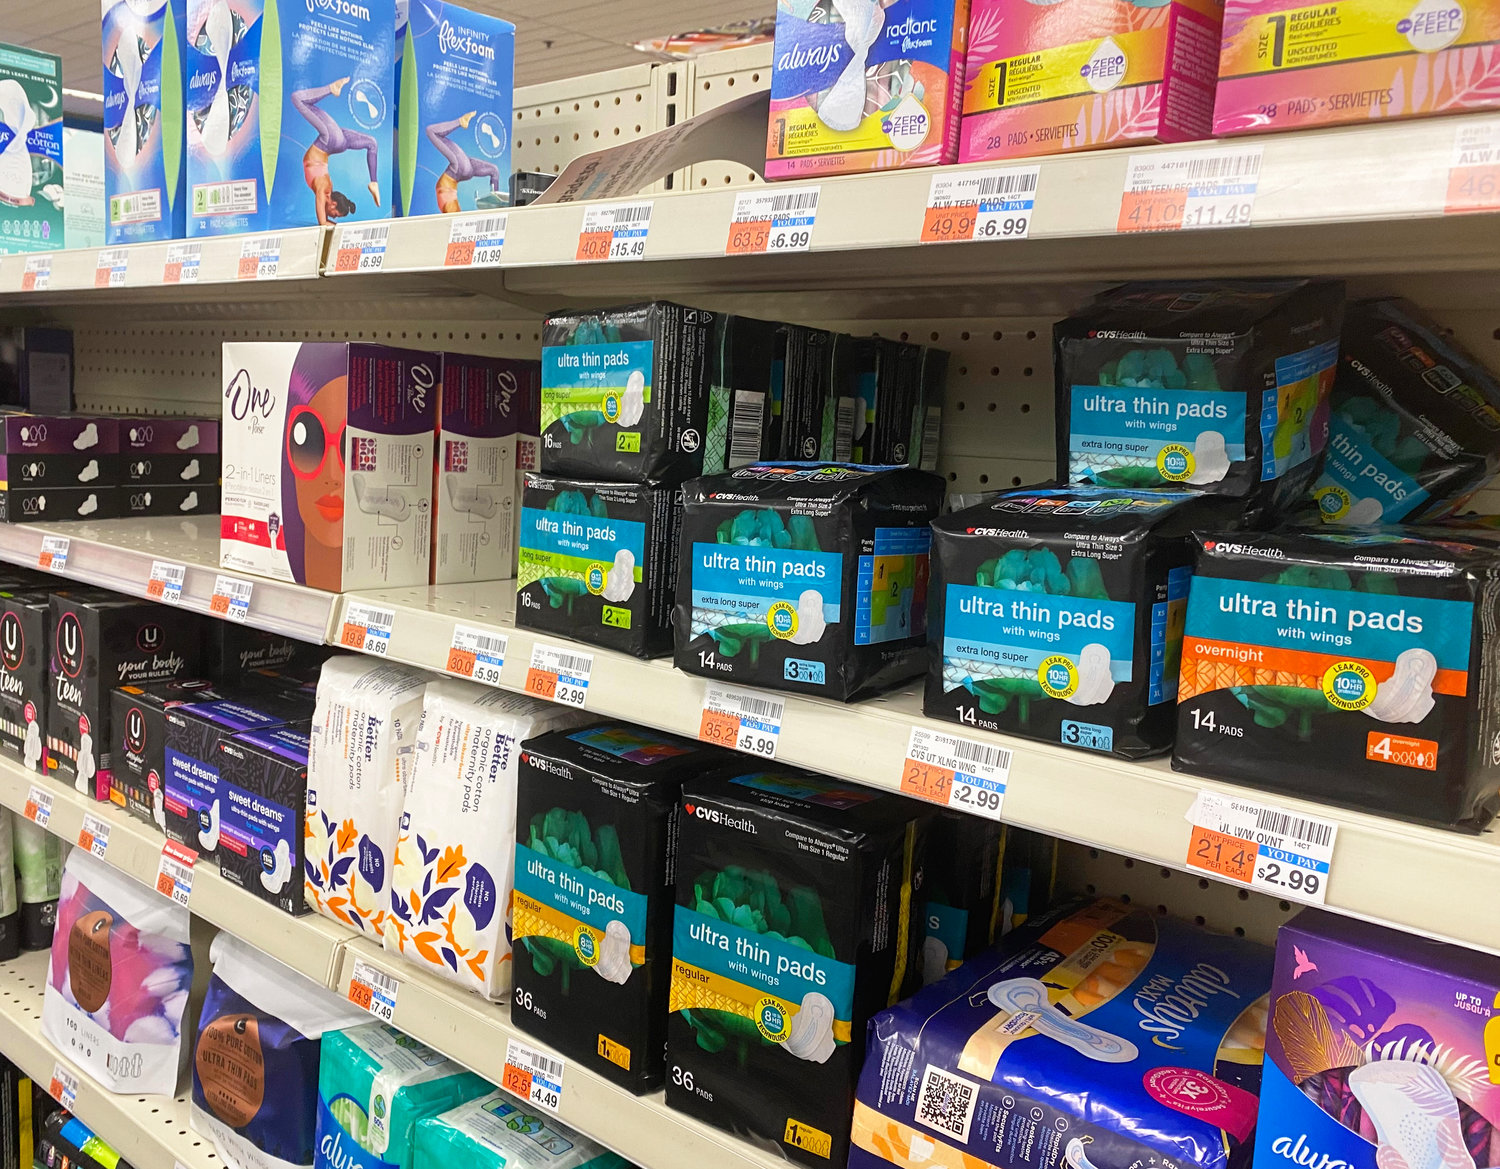 In a public policy first, the city of Pawtucket has begun a program of offering free menstrual products in all of its municipal buildings. Shown above is an aisle of menstrual products at a local pharmacy.